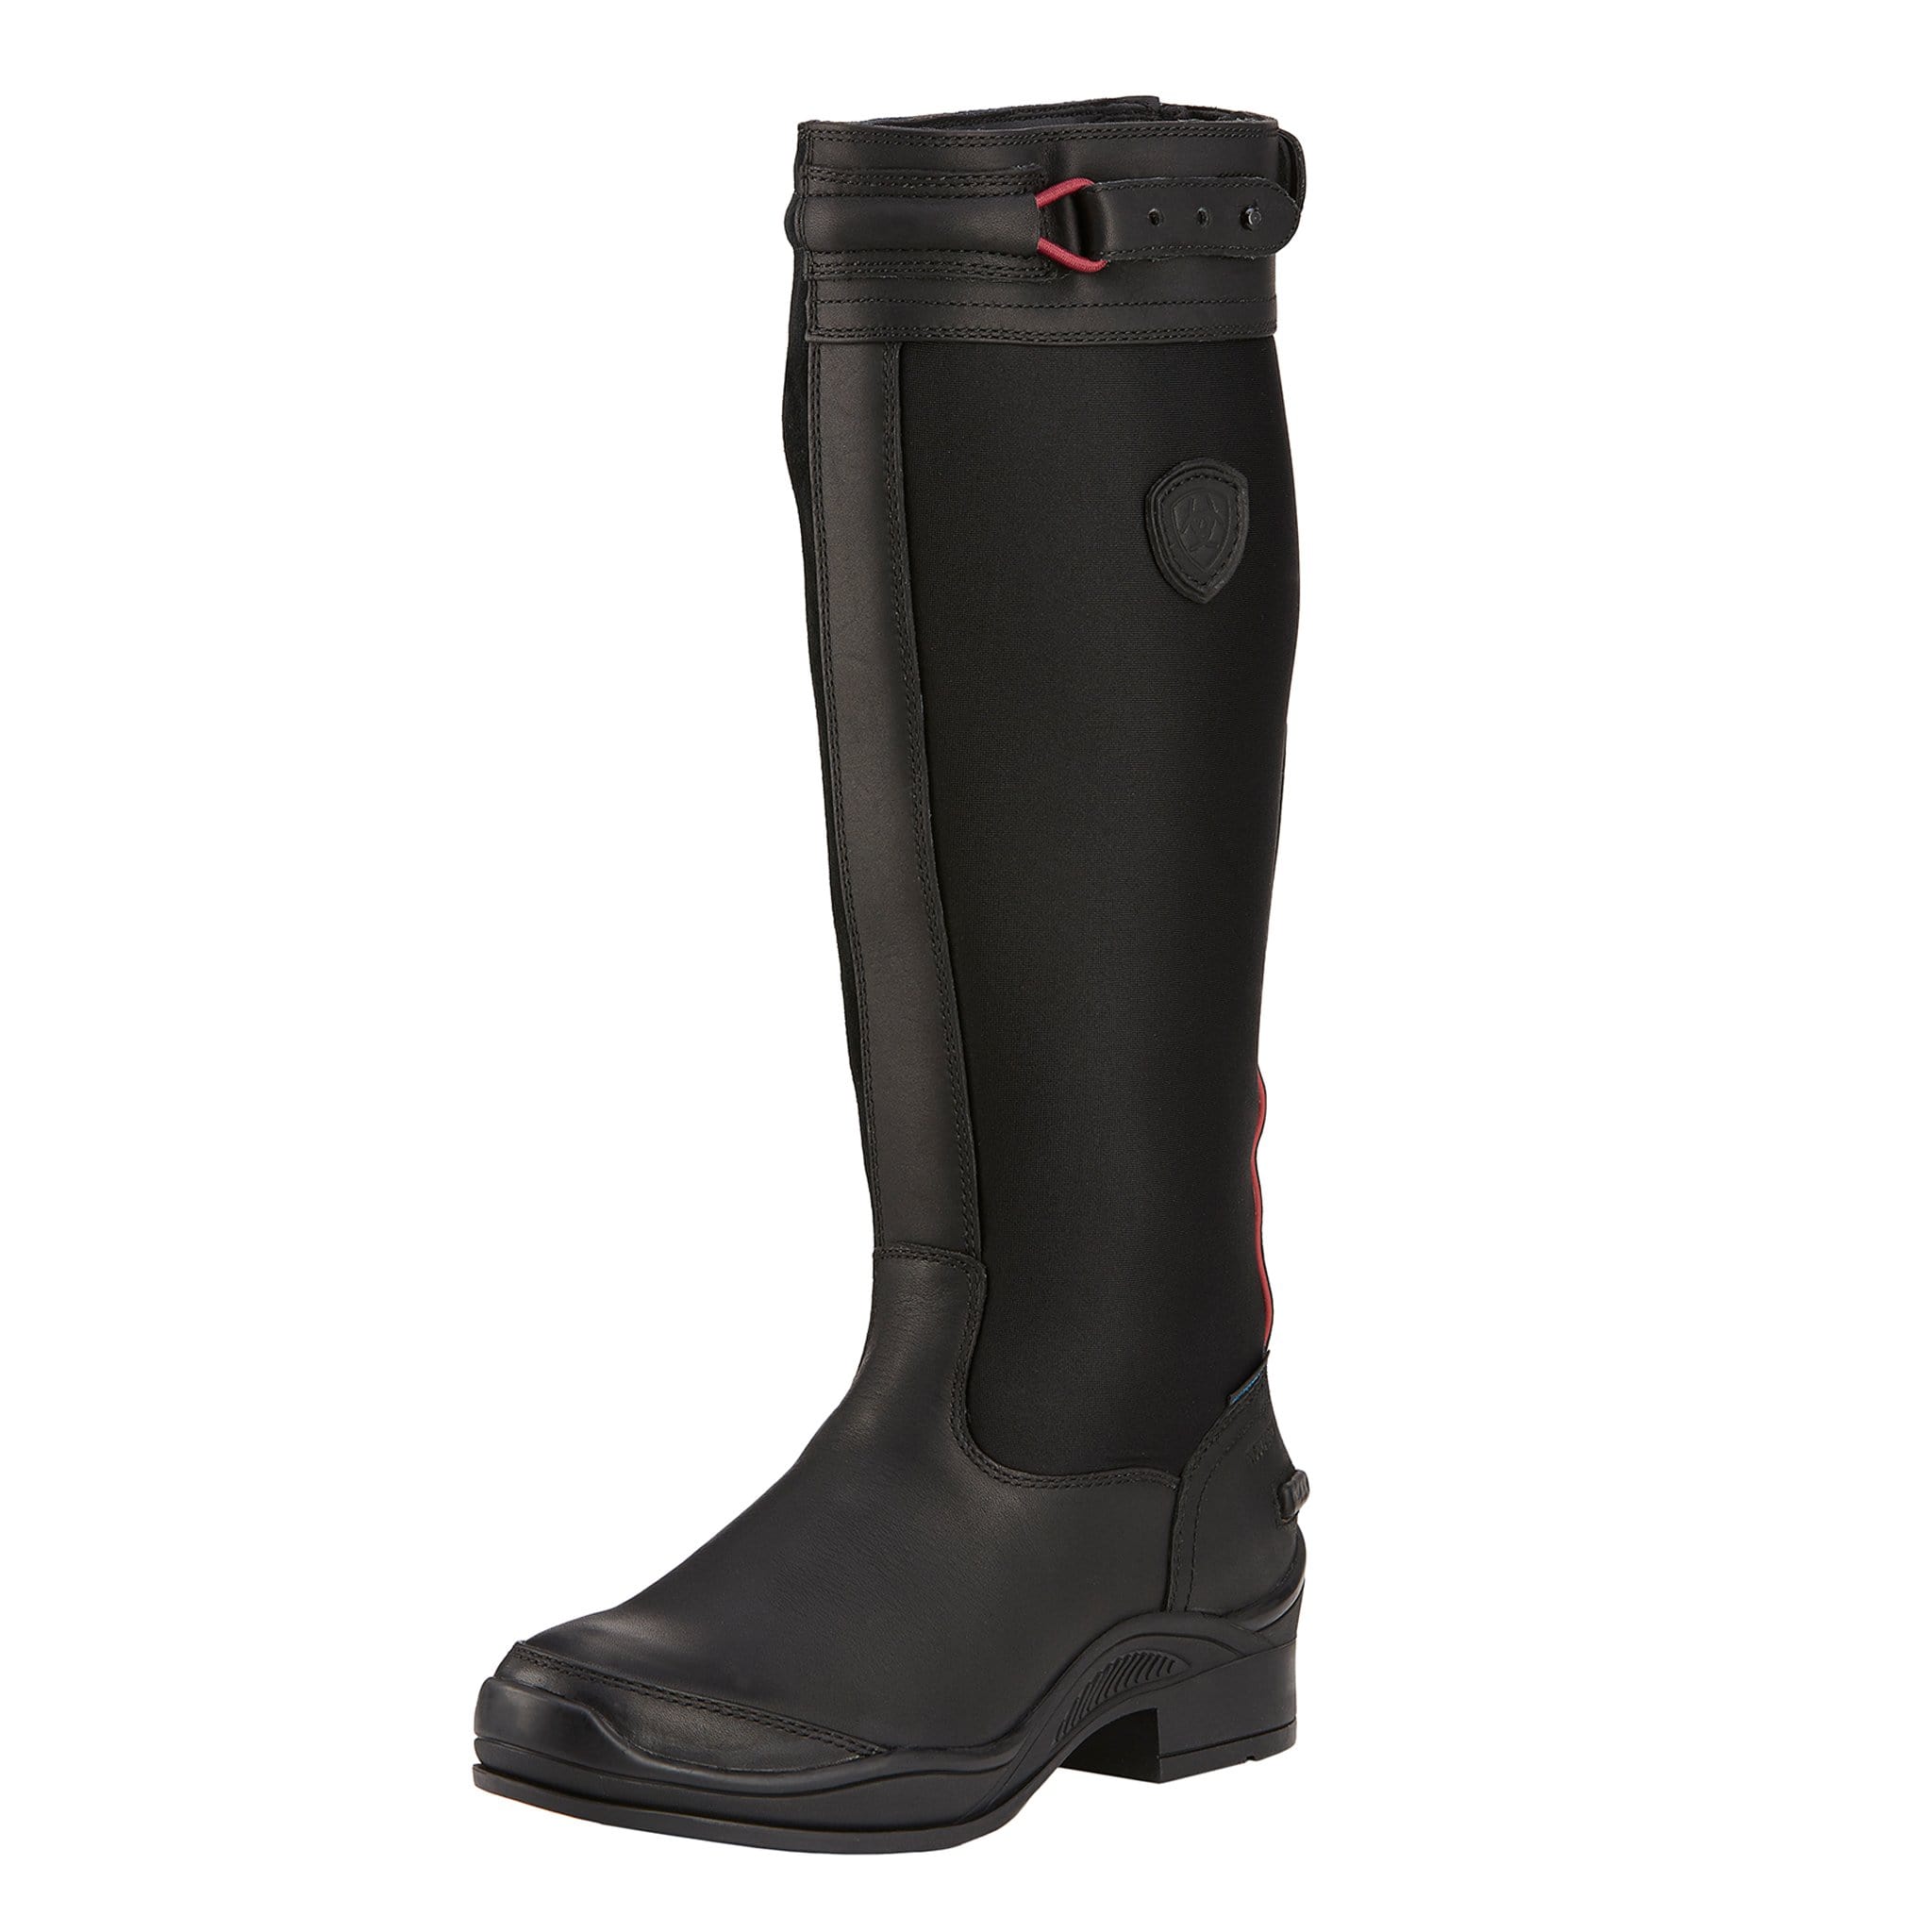 Ariat Extreme Waterproof Insulated Riding Boots 10016384 Black Front